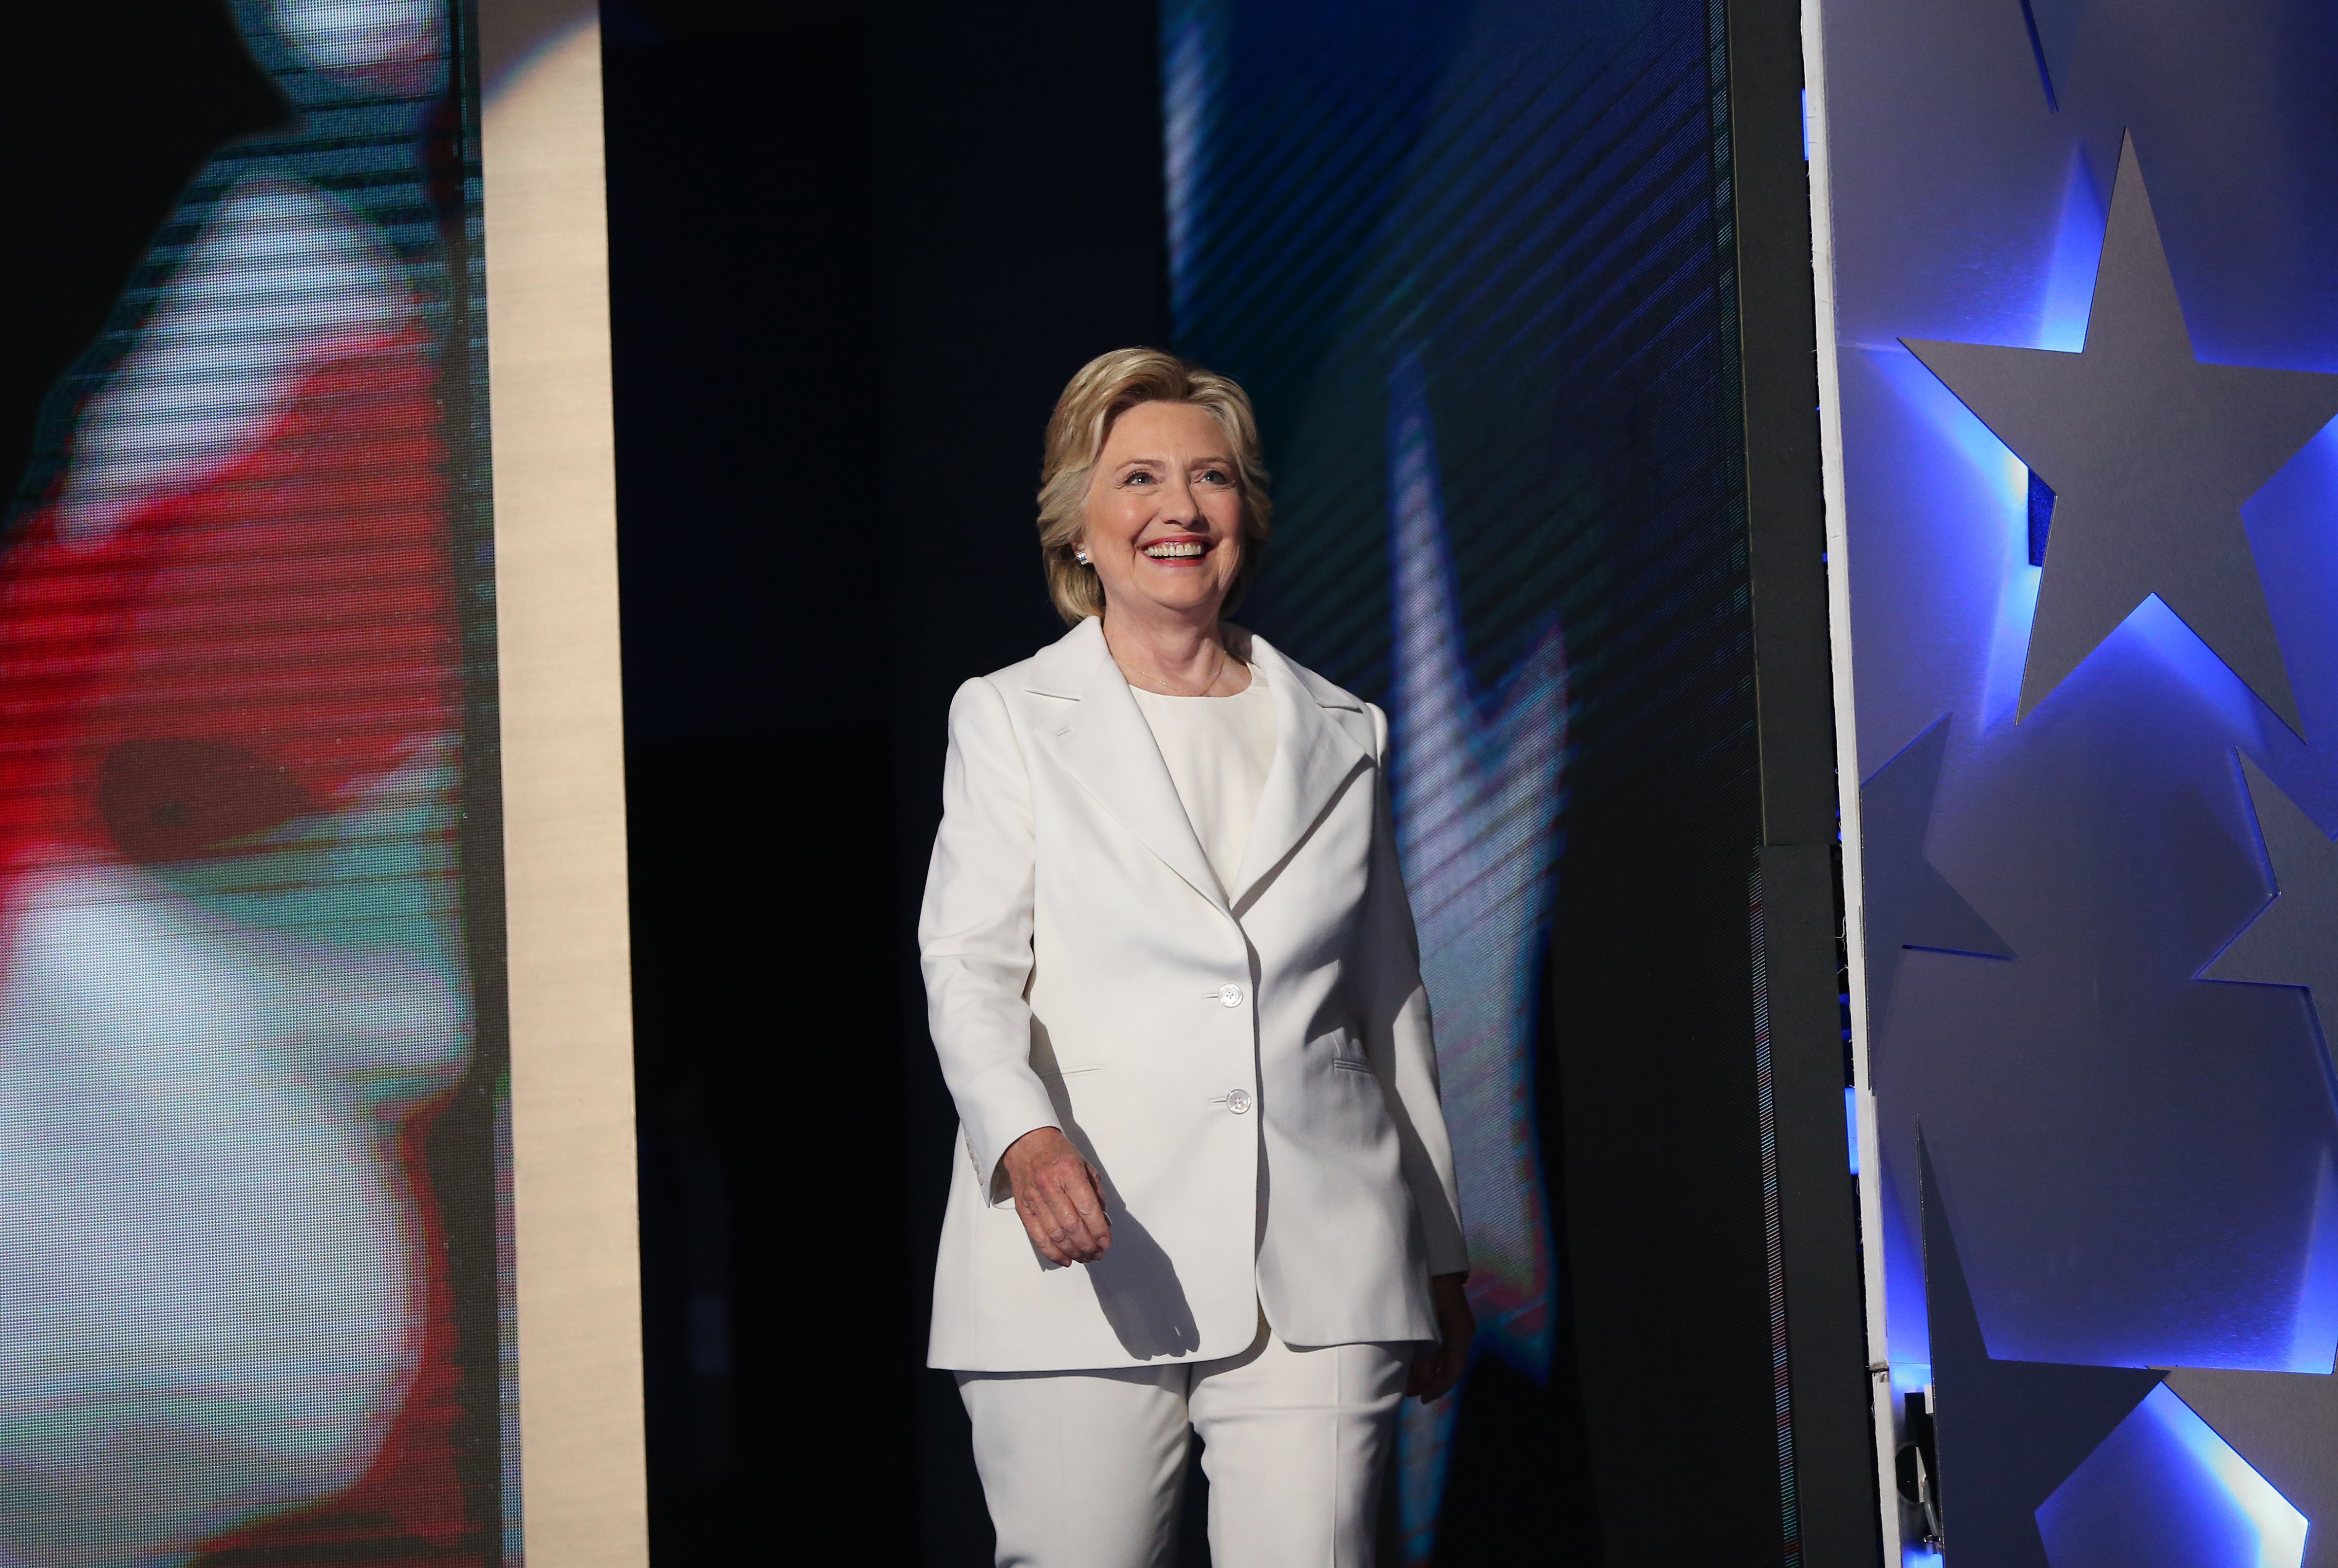 Hillary Clinton, 2016 Democratic presidential nominee, smiles while arriving on stage during the Democratic National Convention (DNC) in Philadelphia, Pennsylvania, U.S., on Thursday, July 28, 2016. Division among Democrats has been overcome through speeches from two presidents, another first lady and a vice-president, who raised the stakes for their candidate by warning that her opponent posed an unprecedented threat to American diplomacy. Photographer: Daniel Acker/Bloomberg via Getty Images (Daniel Acker&mdash;Bloomberg/Getty Images)